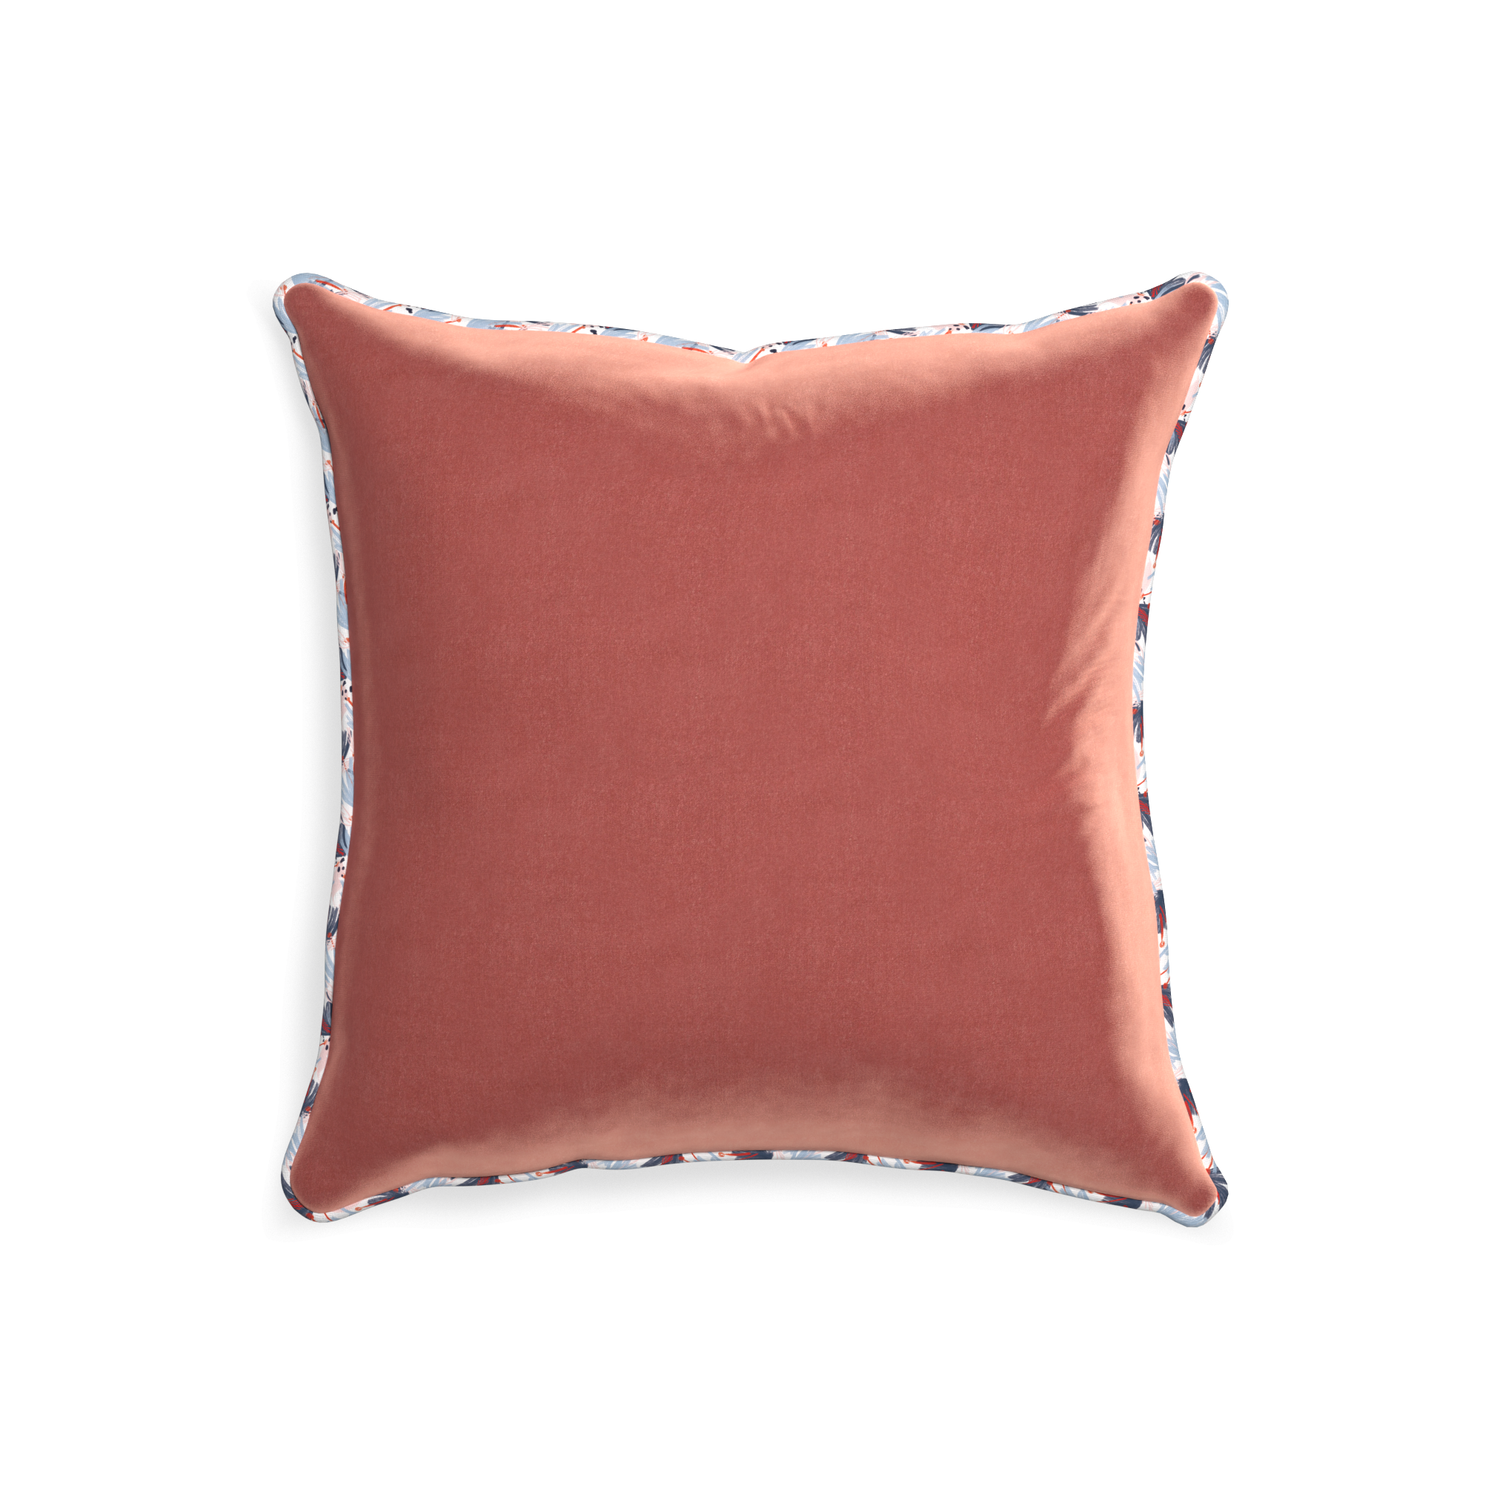 20-square cosmo velvet custom pillow with e piping on white background